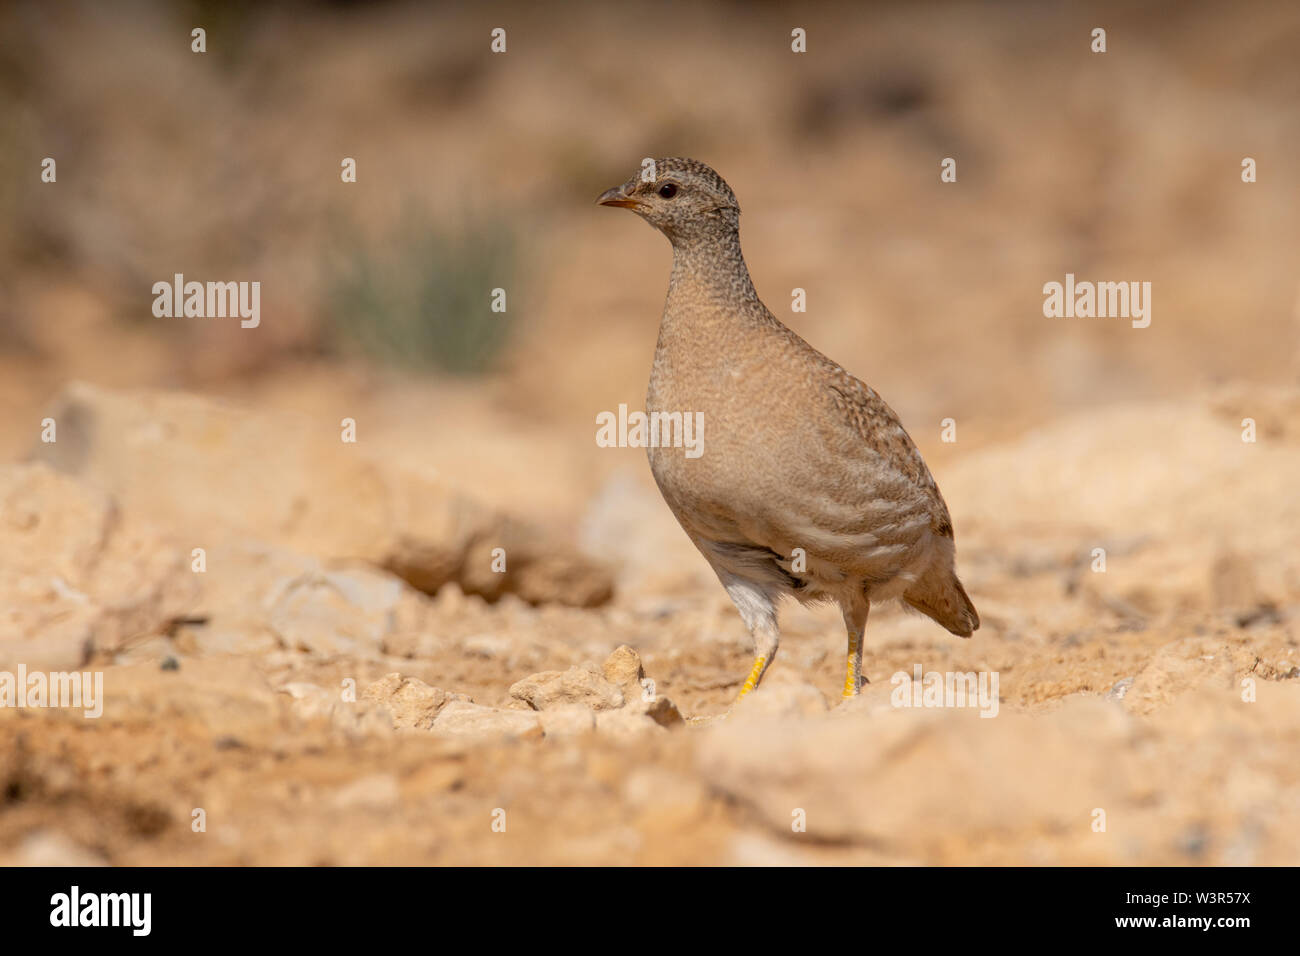 sand partridge (Ammoperdix heyi) is a gamebird in the pheasant family Phasianidae of the order Galliformes, gallinaceous birds. Photographed in Israel Stock Photo